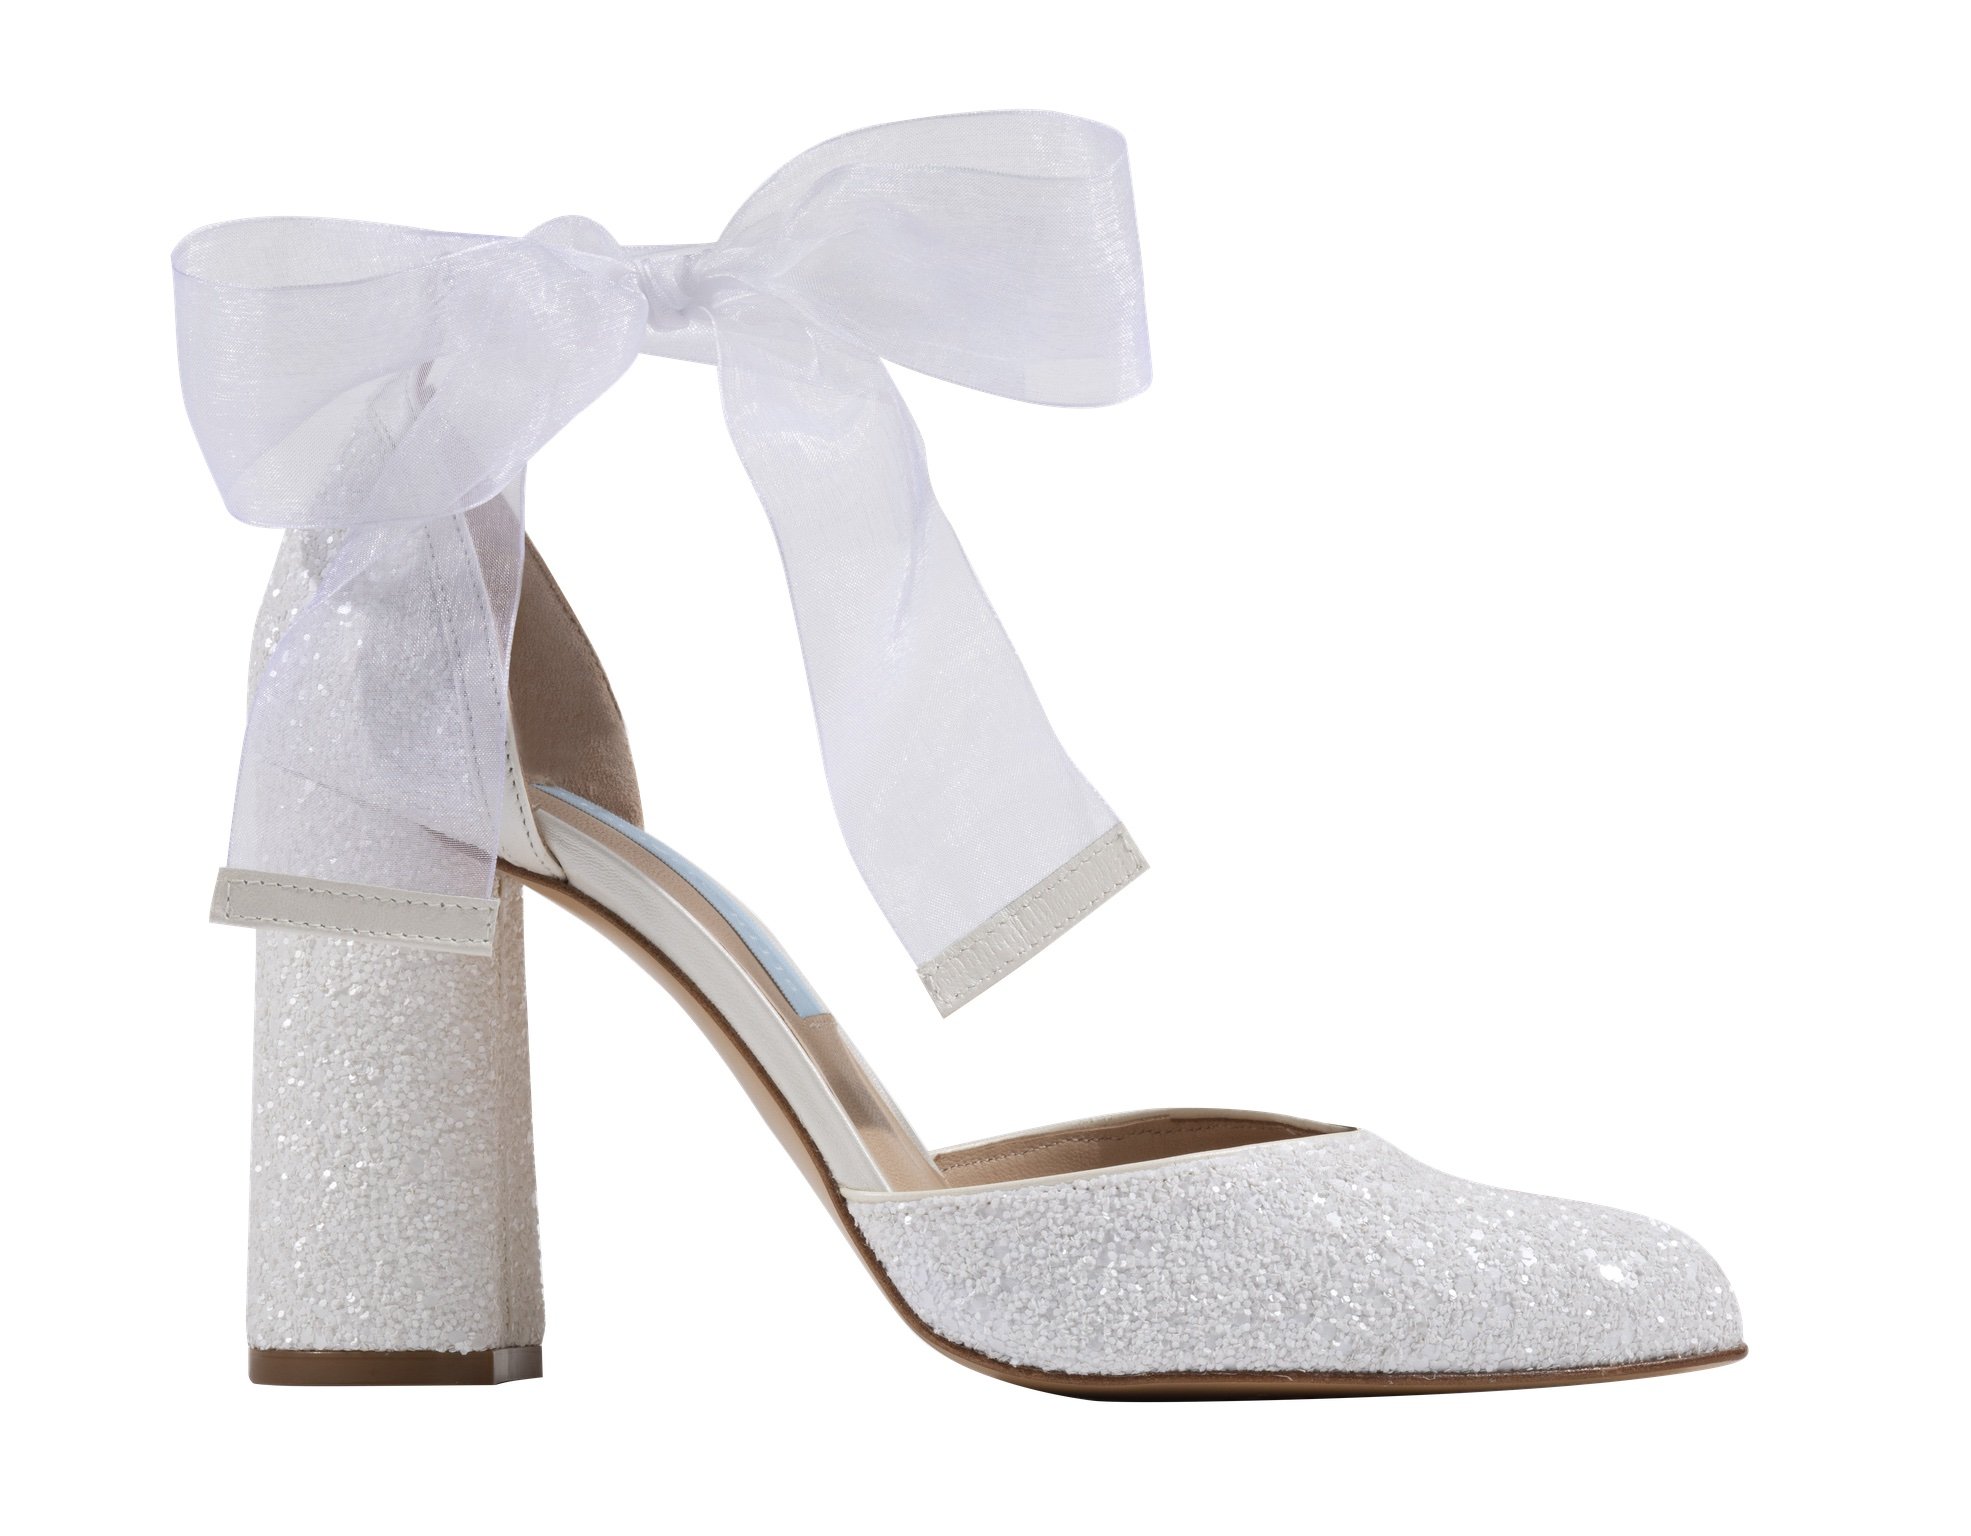 Sparkly Wedding Shoes: The 15 Best Ideas + Faqs